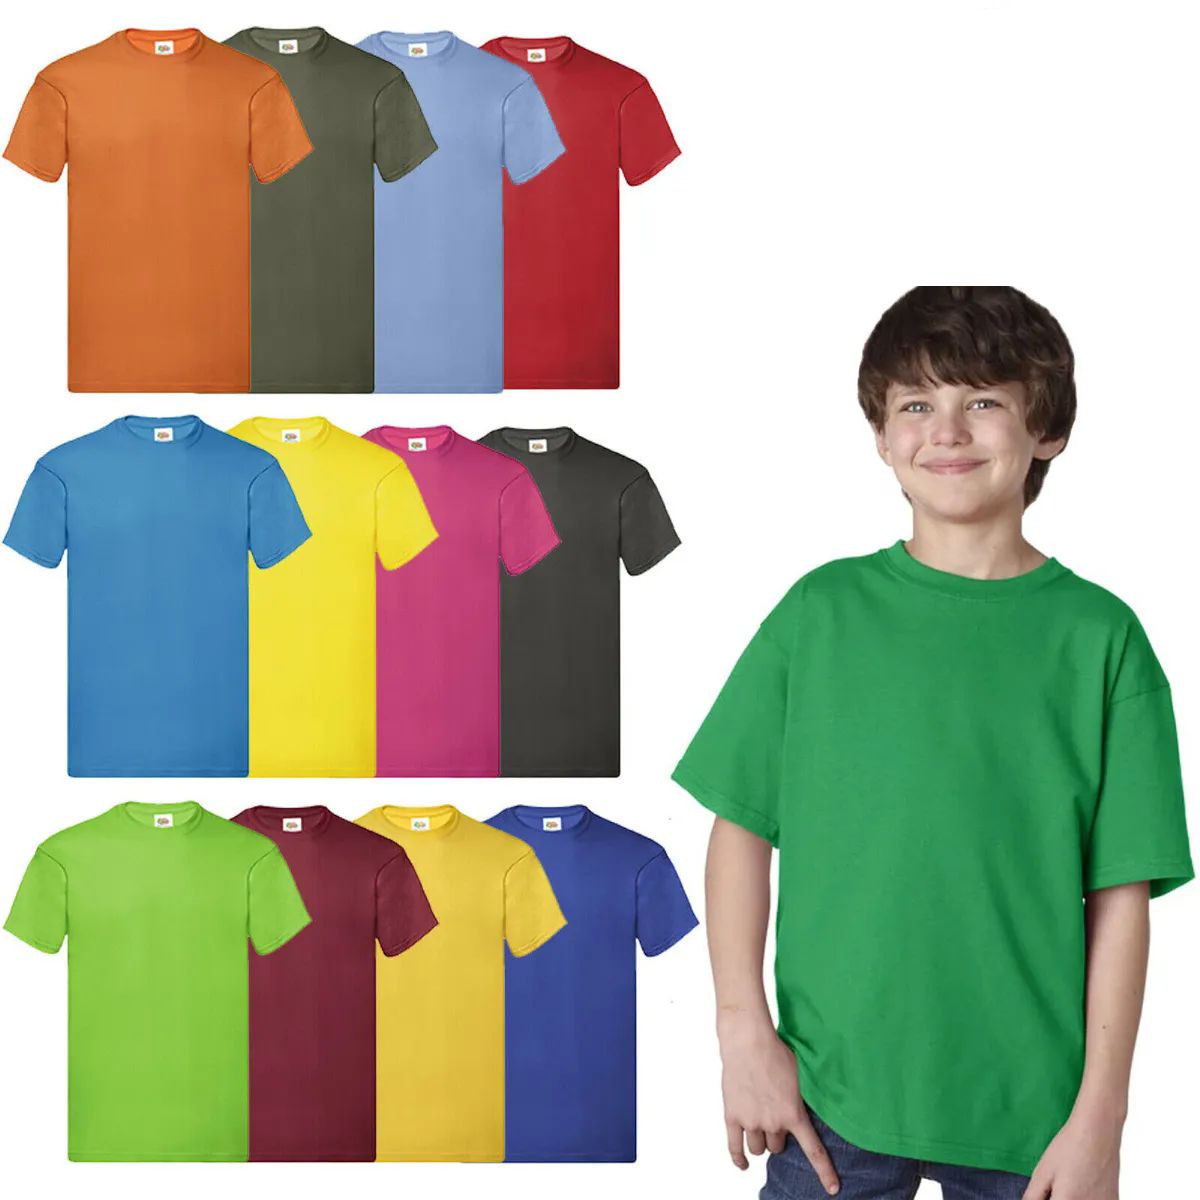 504 Pieces of Billion Hats Kids Youth Cotton Assorted Colors T Shirts Size M